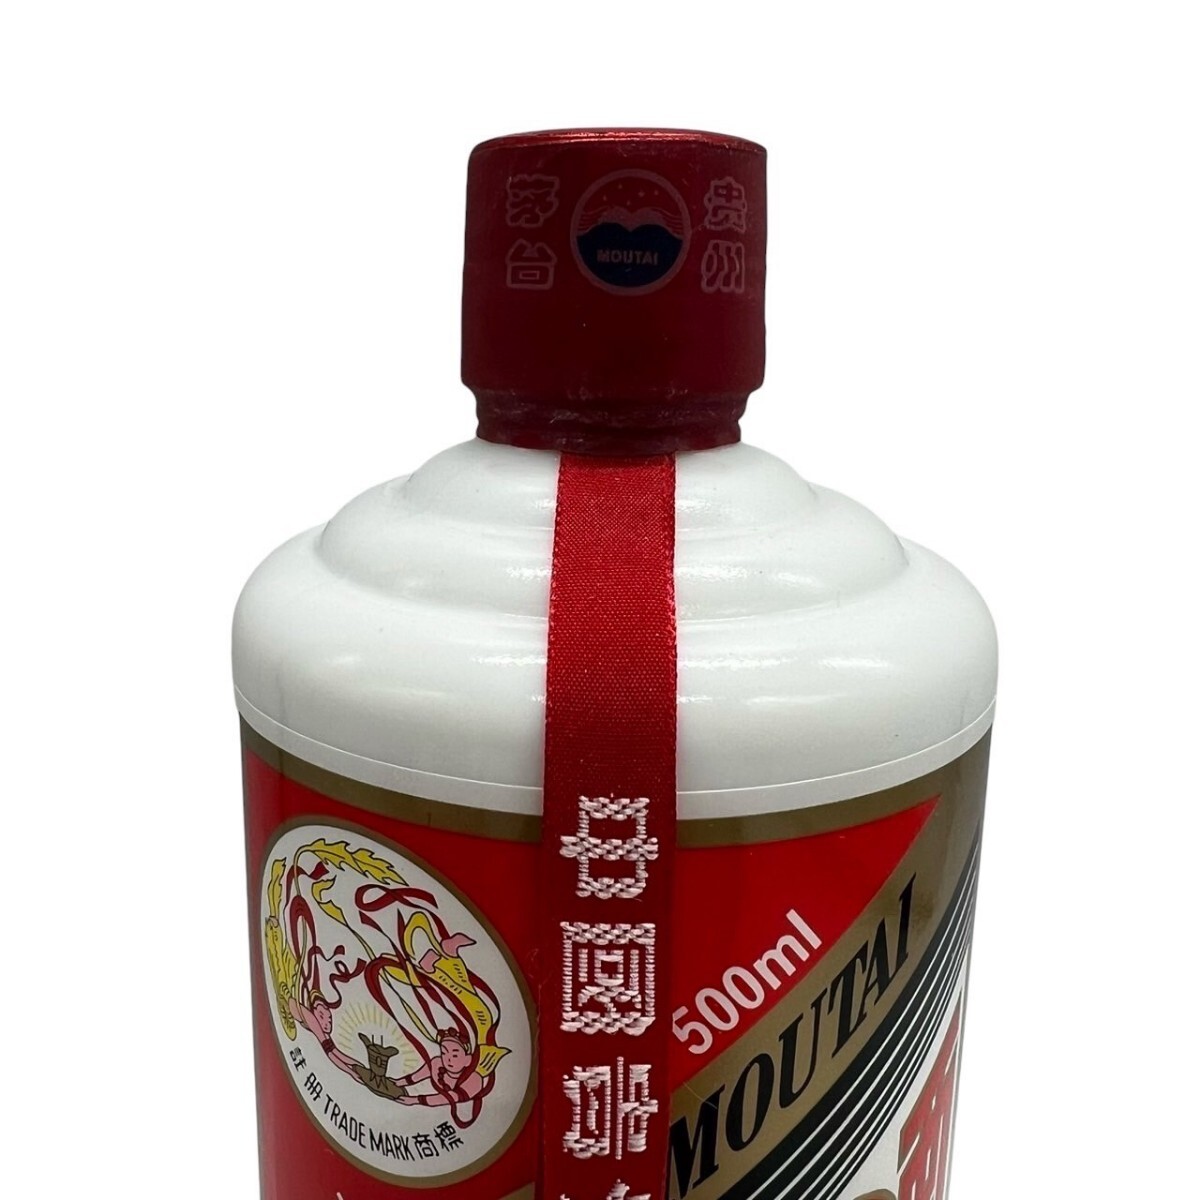 ... pcs sake mao Thai sake heaven woman label 2021 MOUTAI KWEICHOW China sake 500ml 53% box booklet glass attaching 960g 4-15-83 including in a package un- possible N